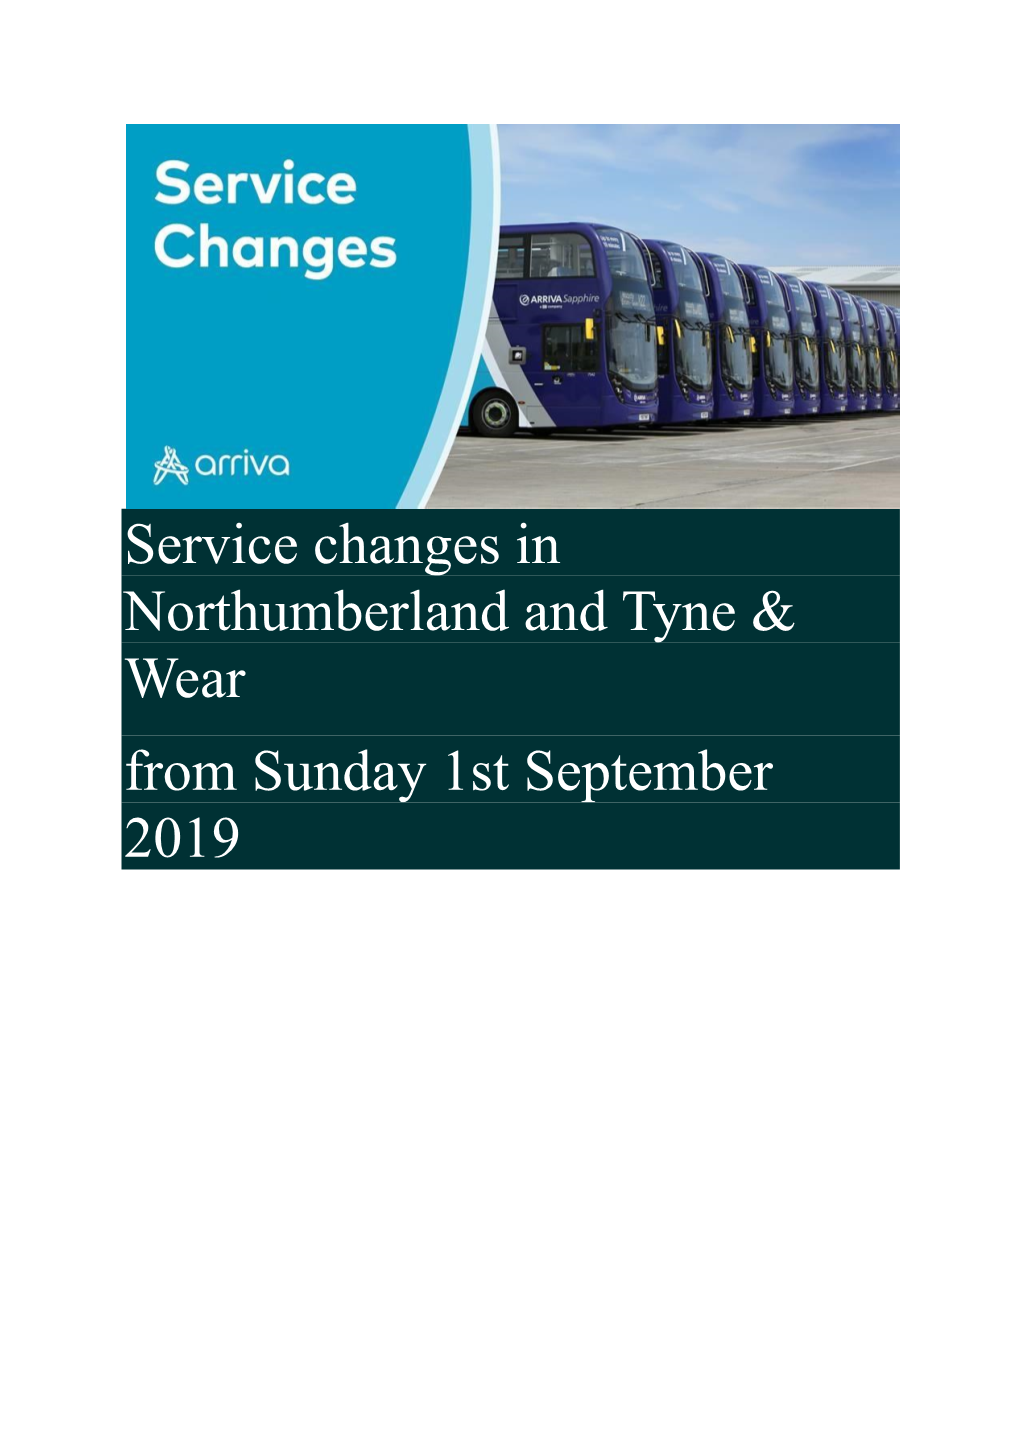 Service Changes in Northumberland and Tyne & Wear from Sunday 1St